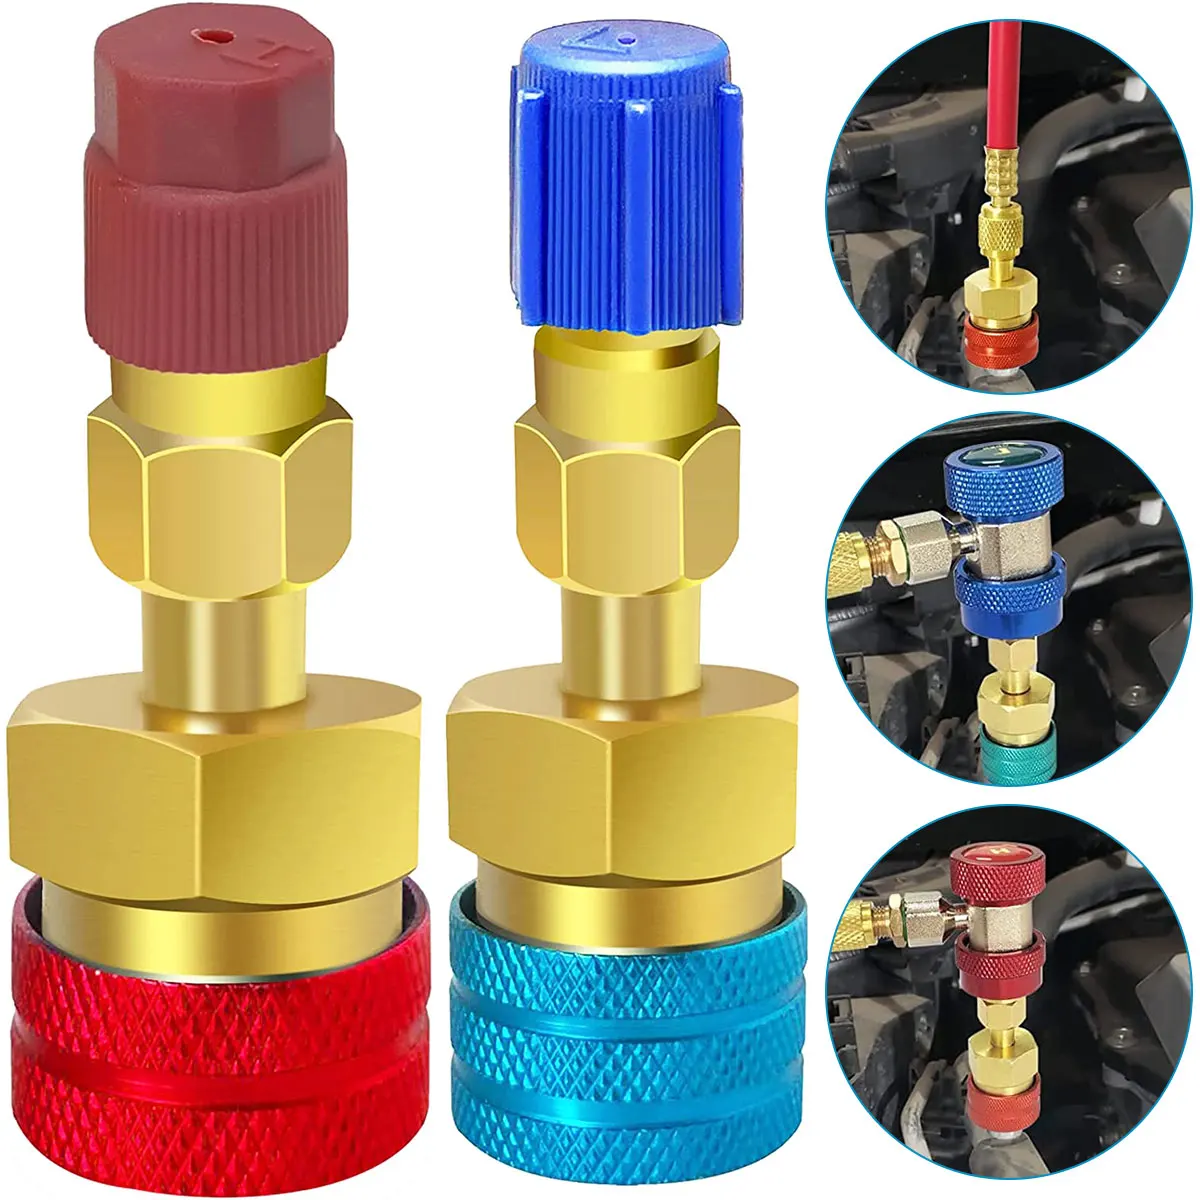 2pcs R1234YF to R134A High and Low Side Quick Coupler R12 to R134AAdapter Fitting Connector Car Air-conditioning Fitting Tools